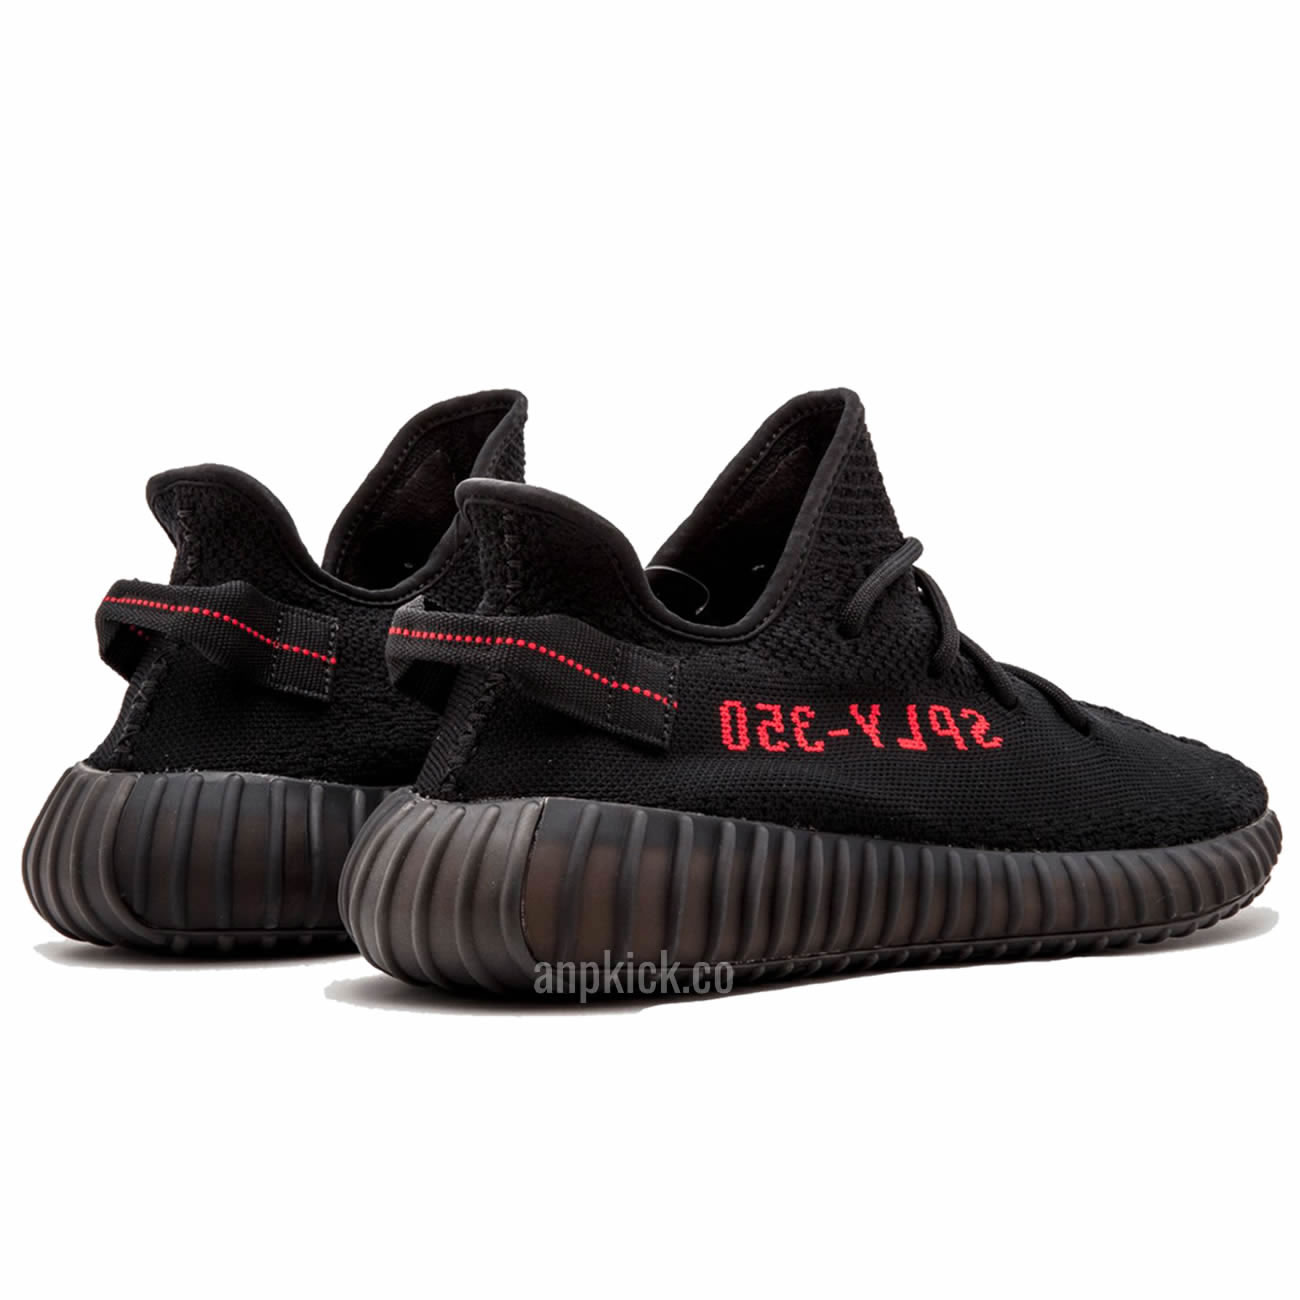 Yeezy Boost 350 V2 Bred Black Red 2020 New Release Cp9652 (3) - newkick.org